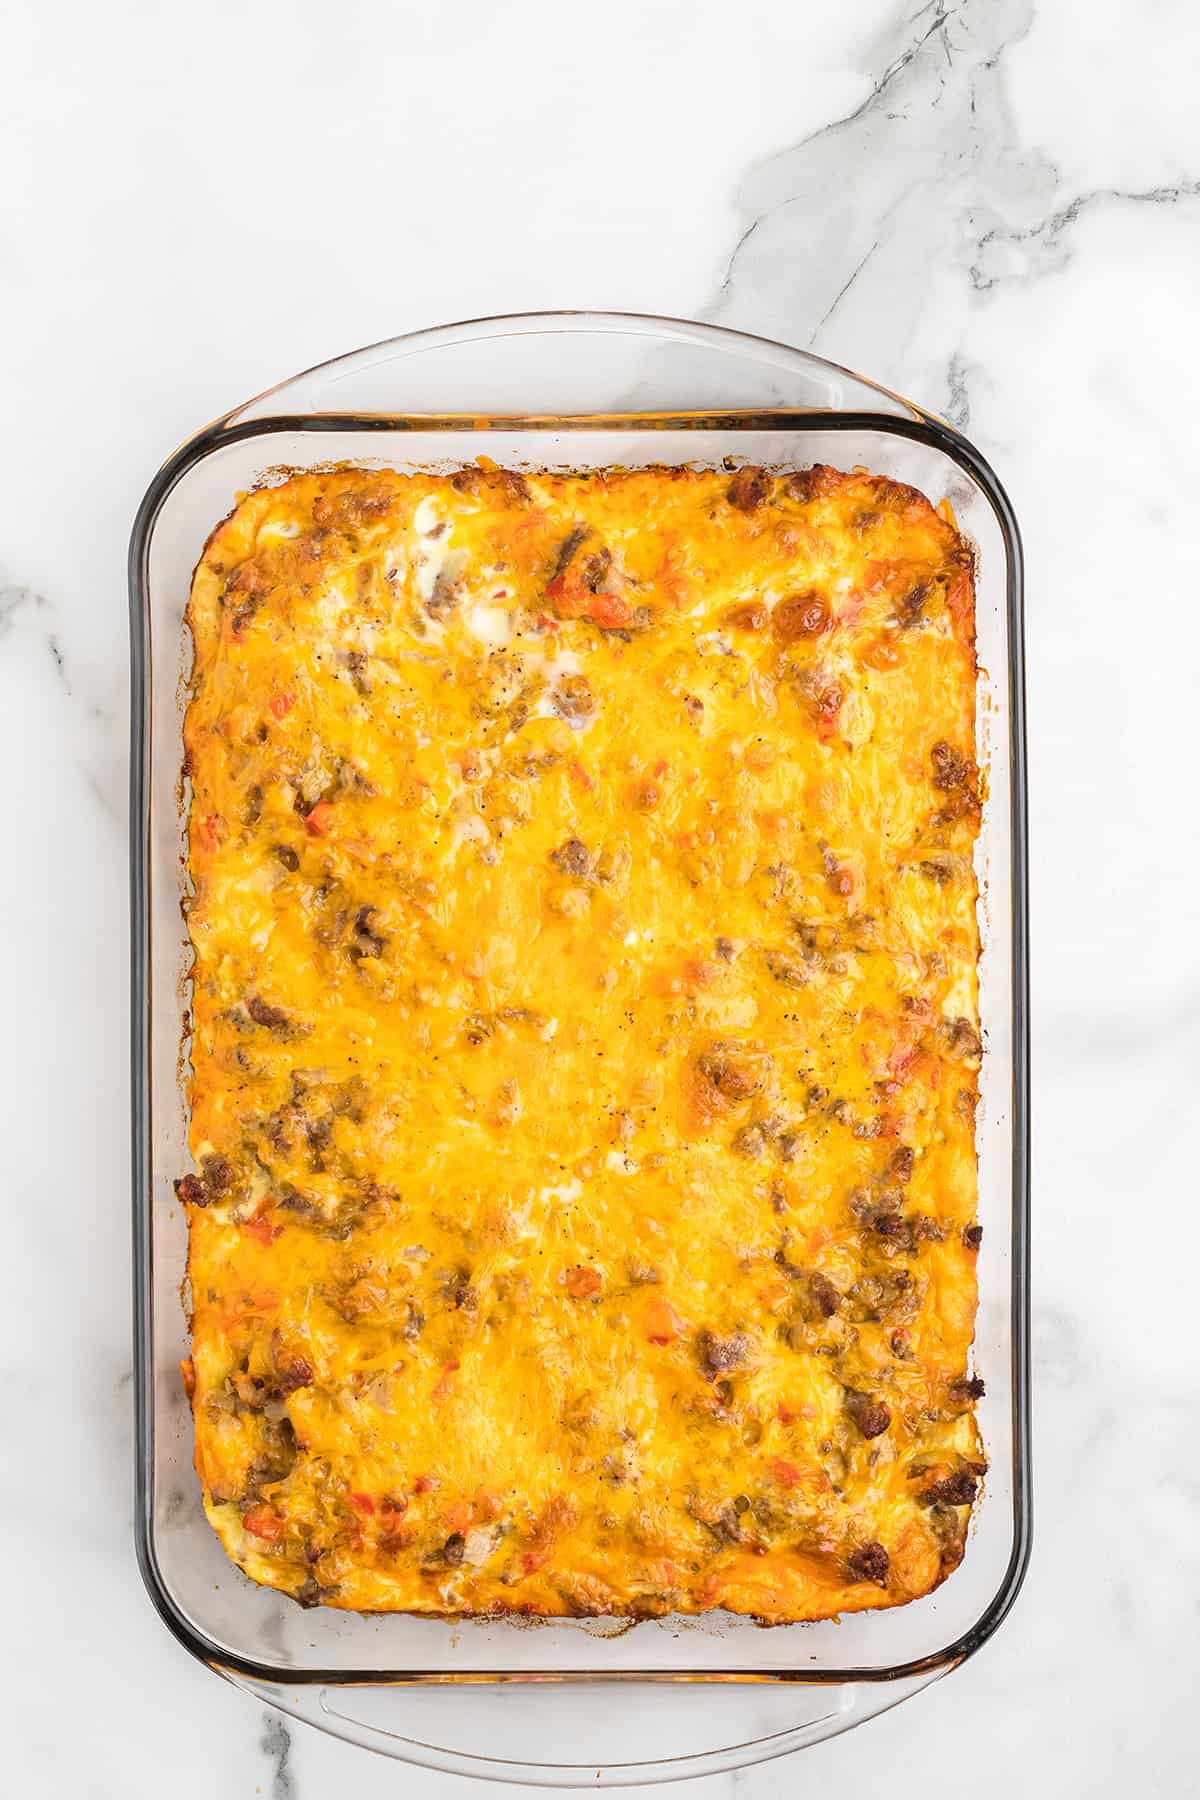 Baked casserole in a glass dish.